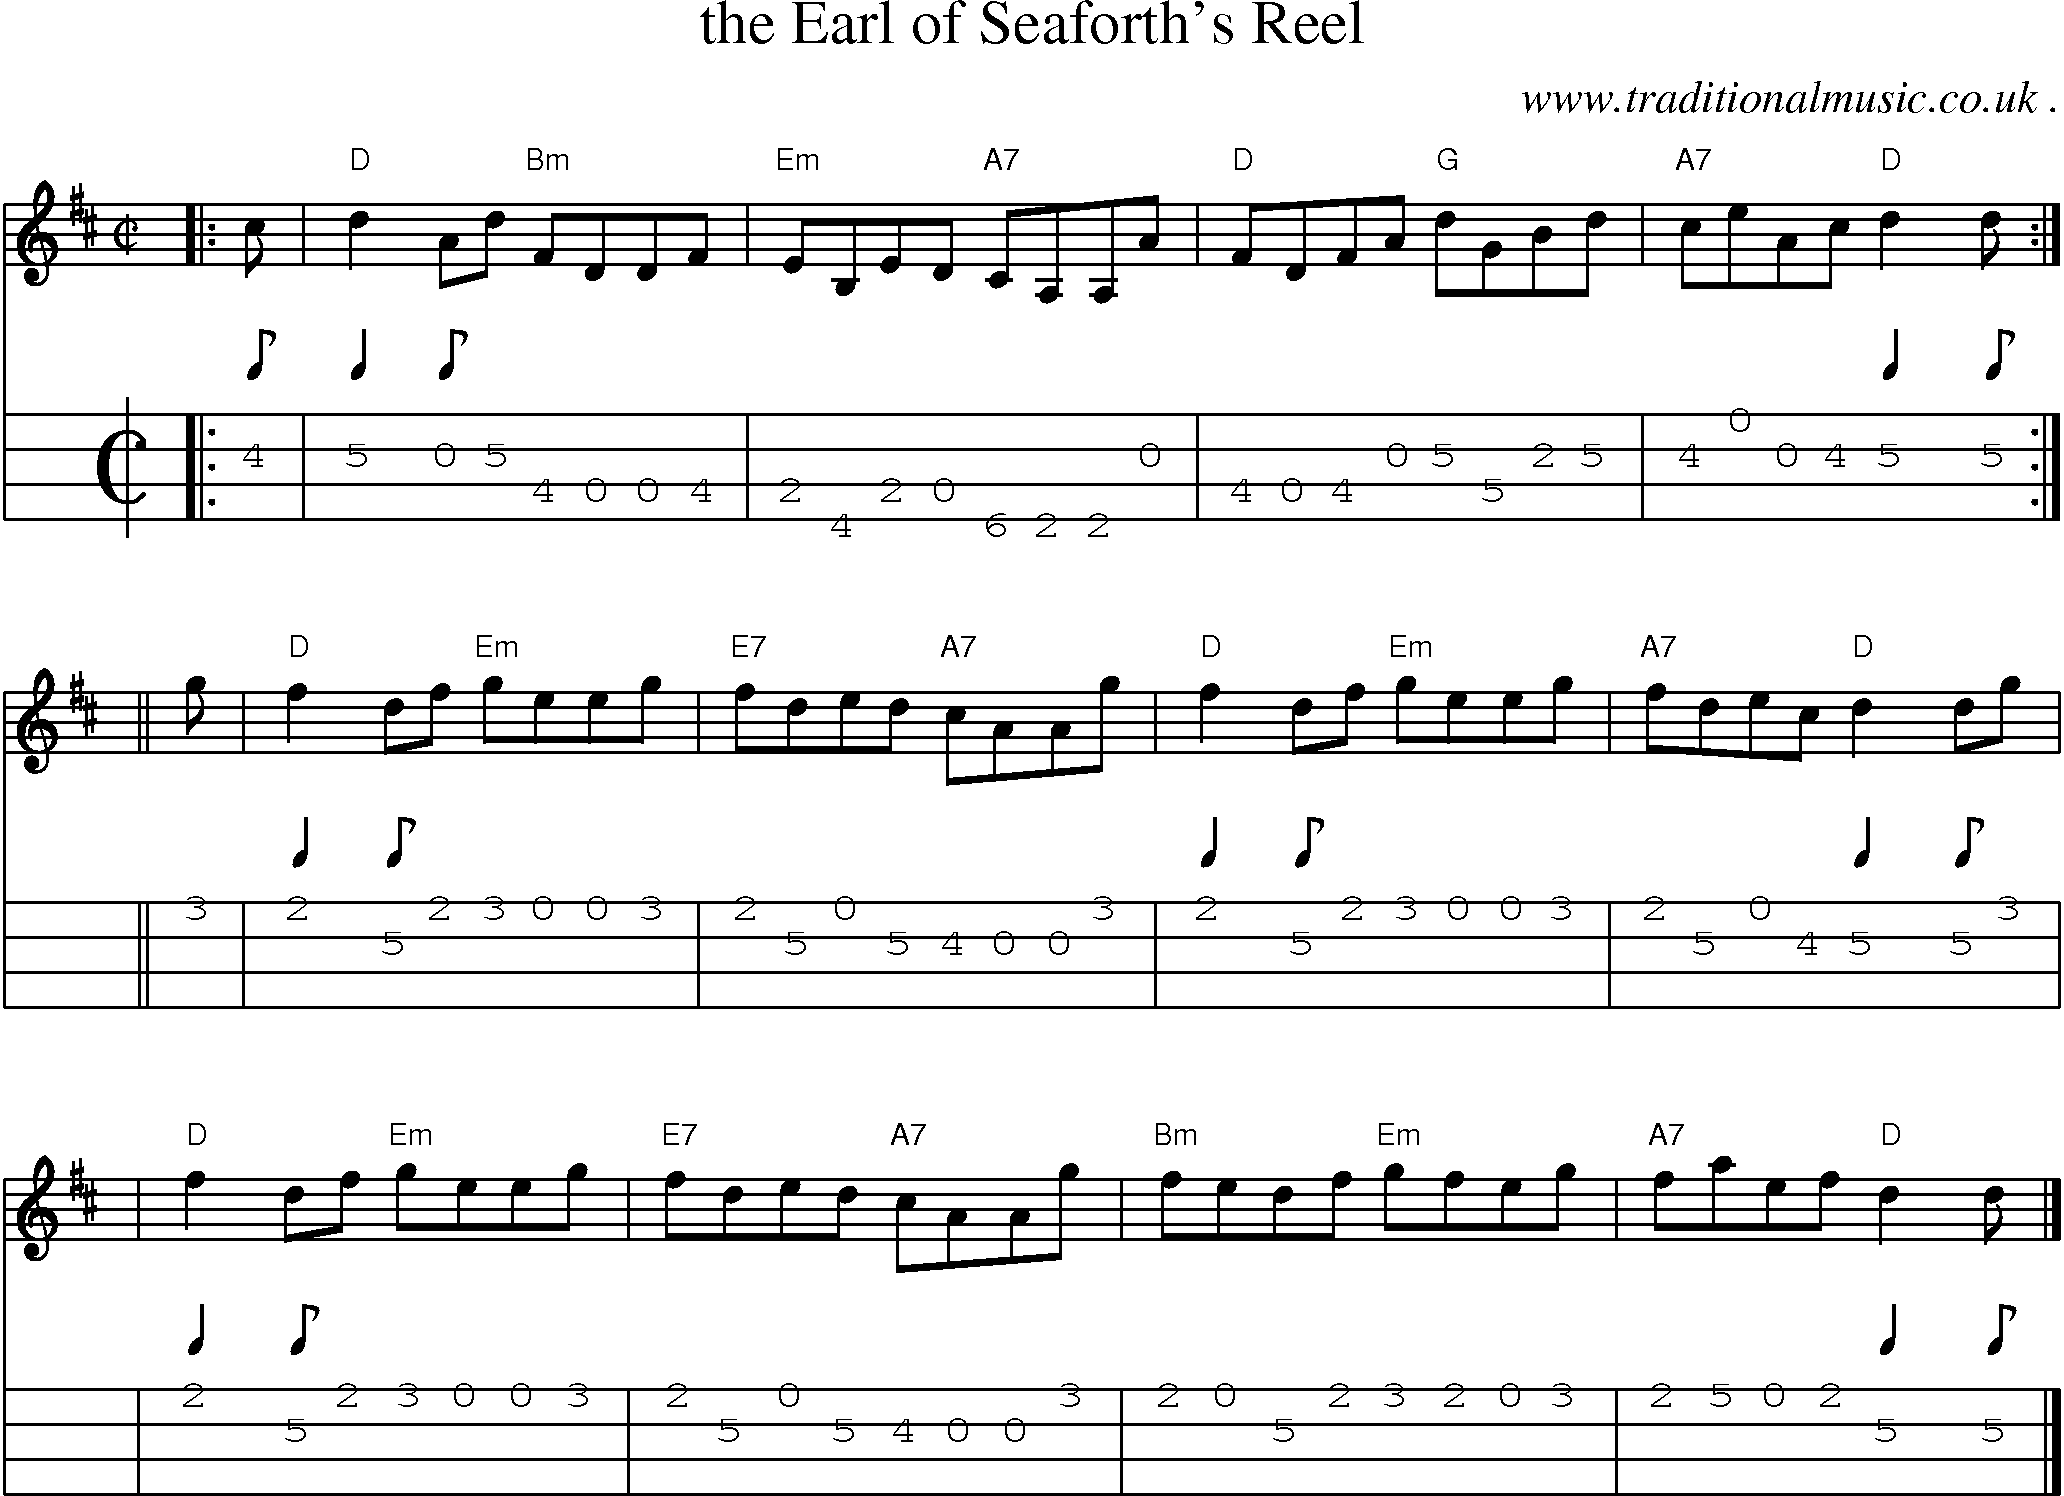 Sheet-music  score, Chords and Mandolin Tabs for The Earl Of Seaforths Reel